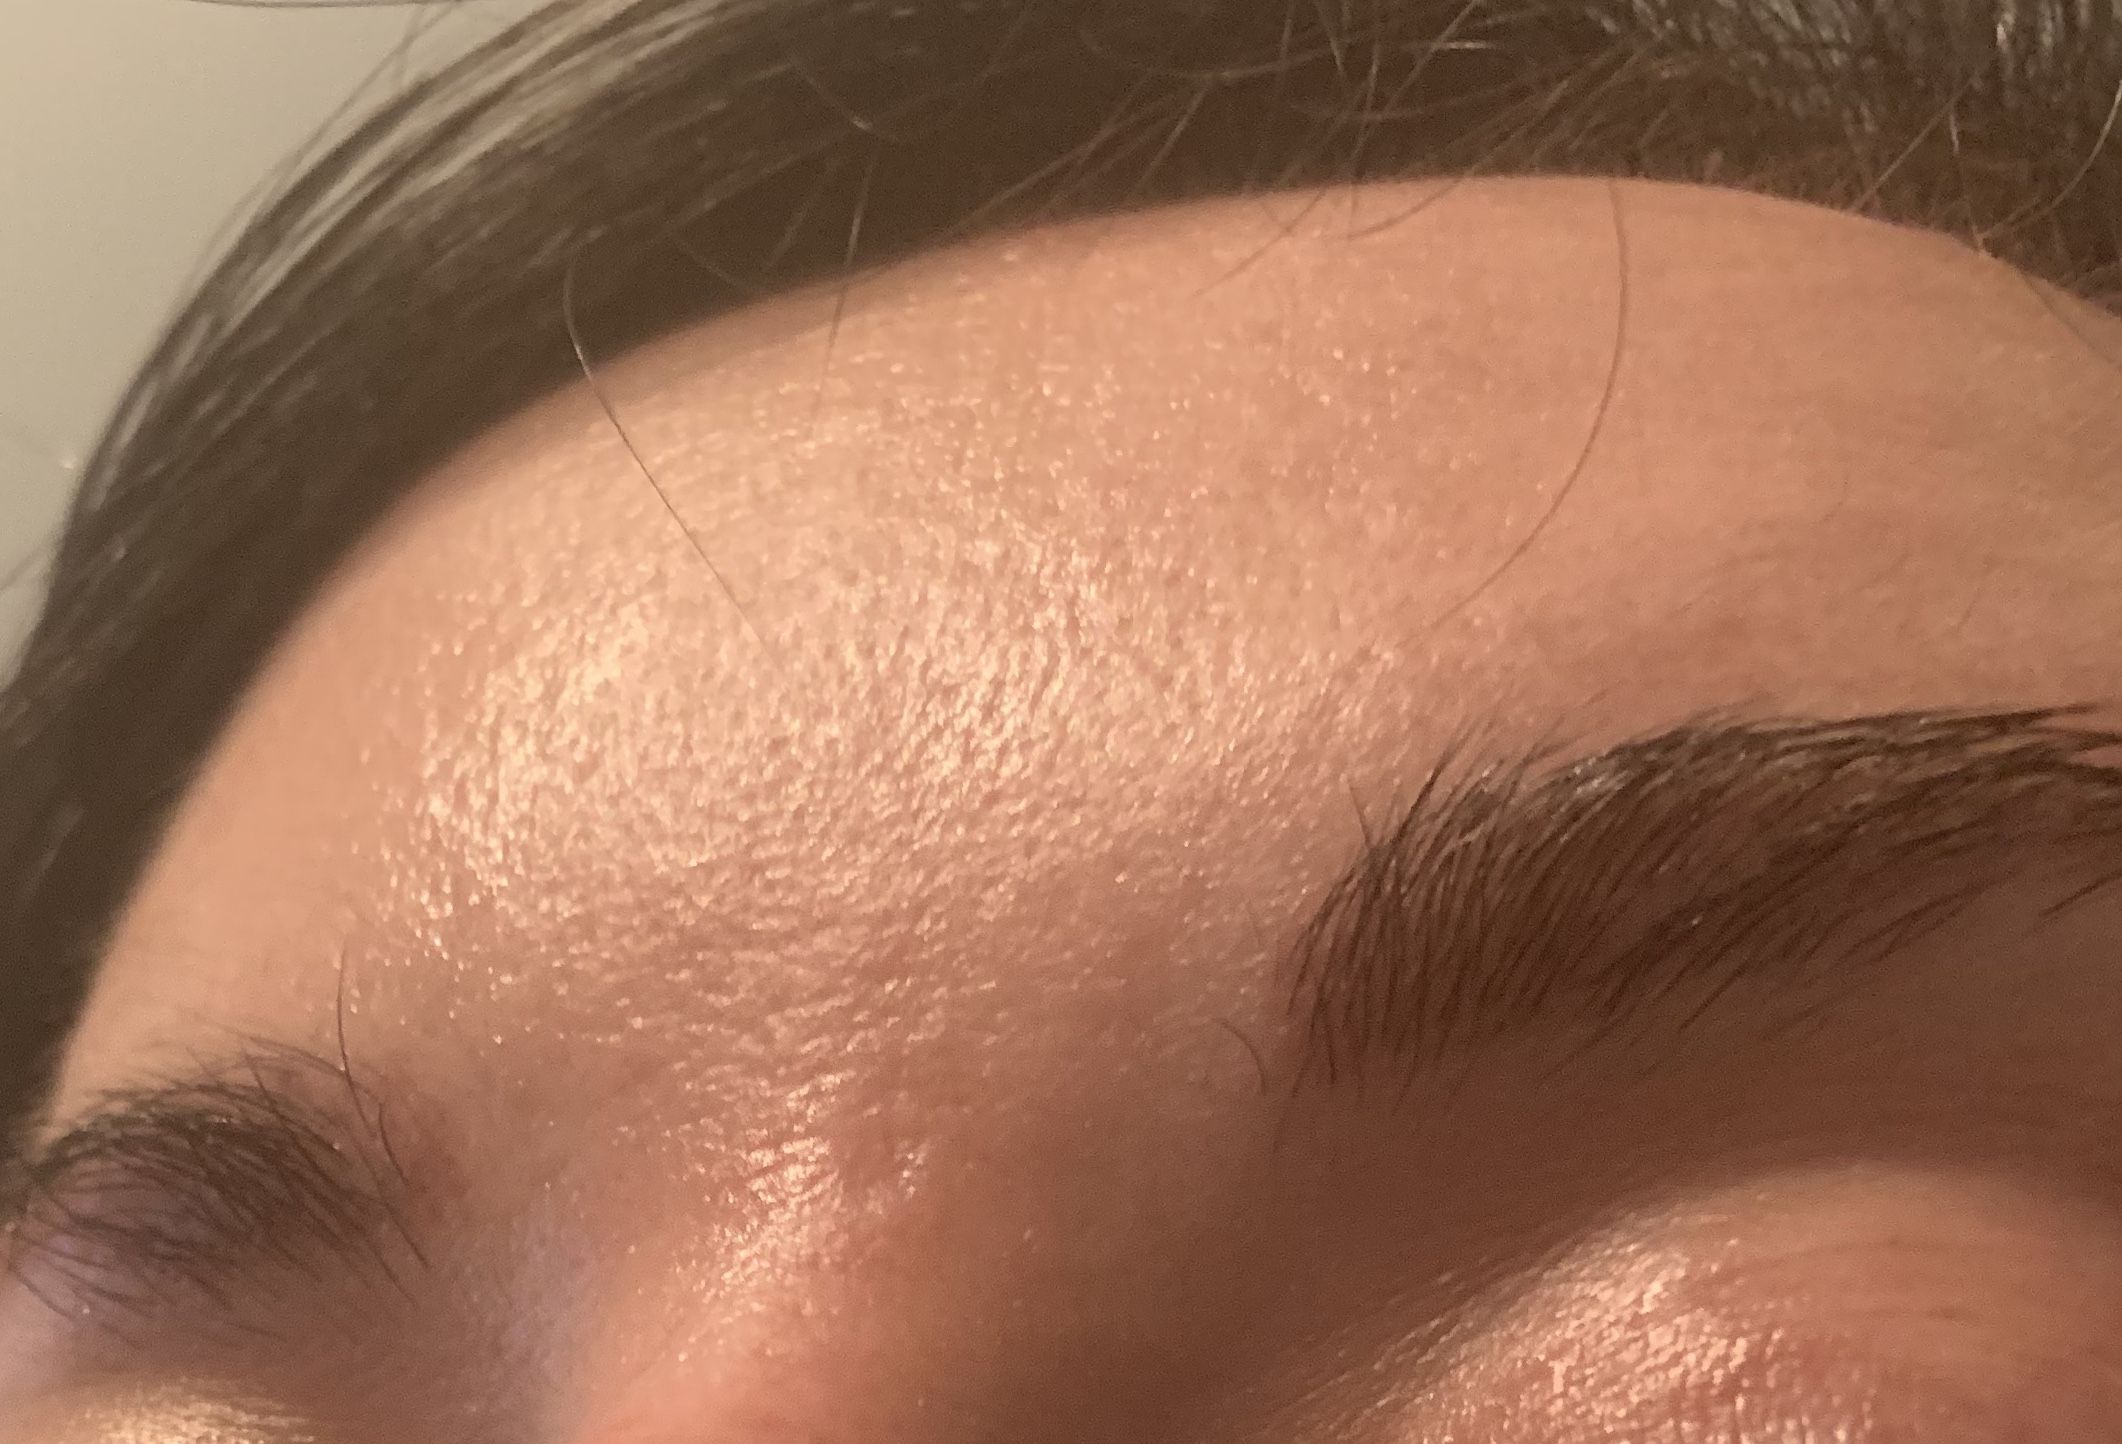 Please help with acne scar that's both raised and indented